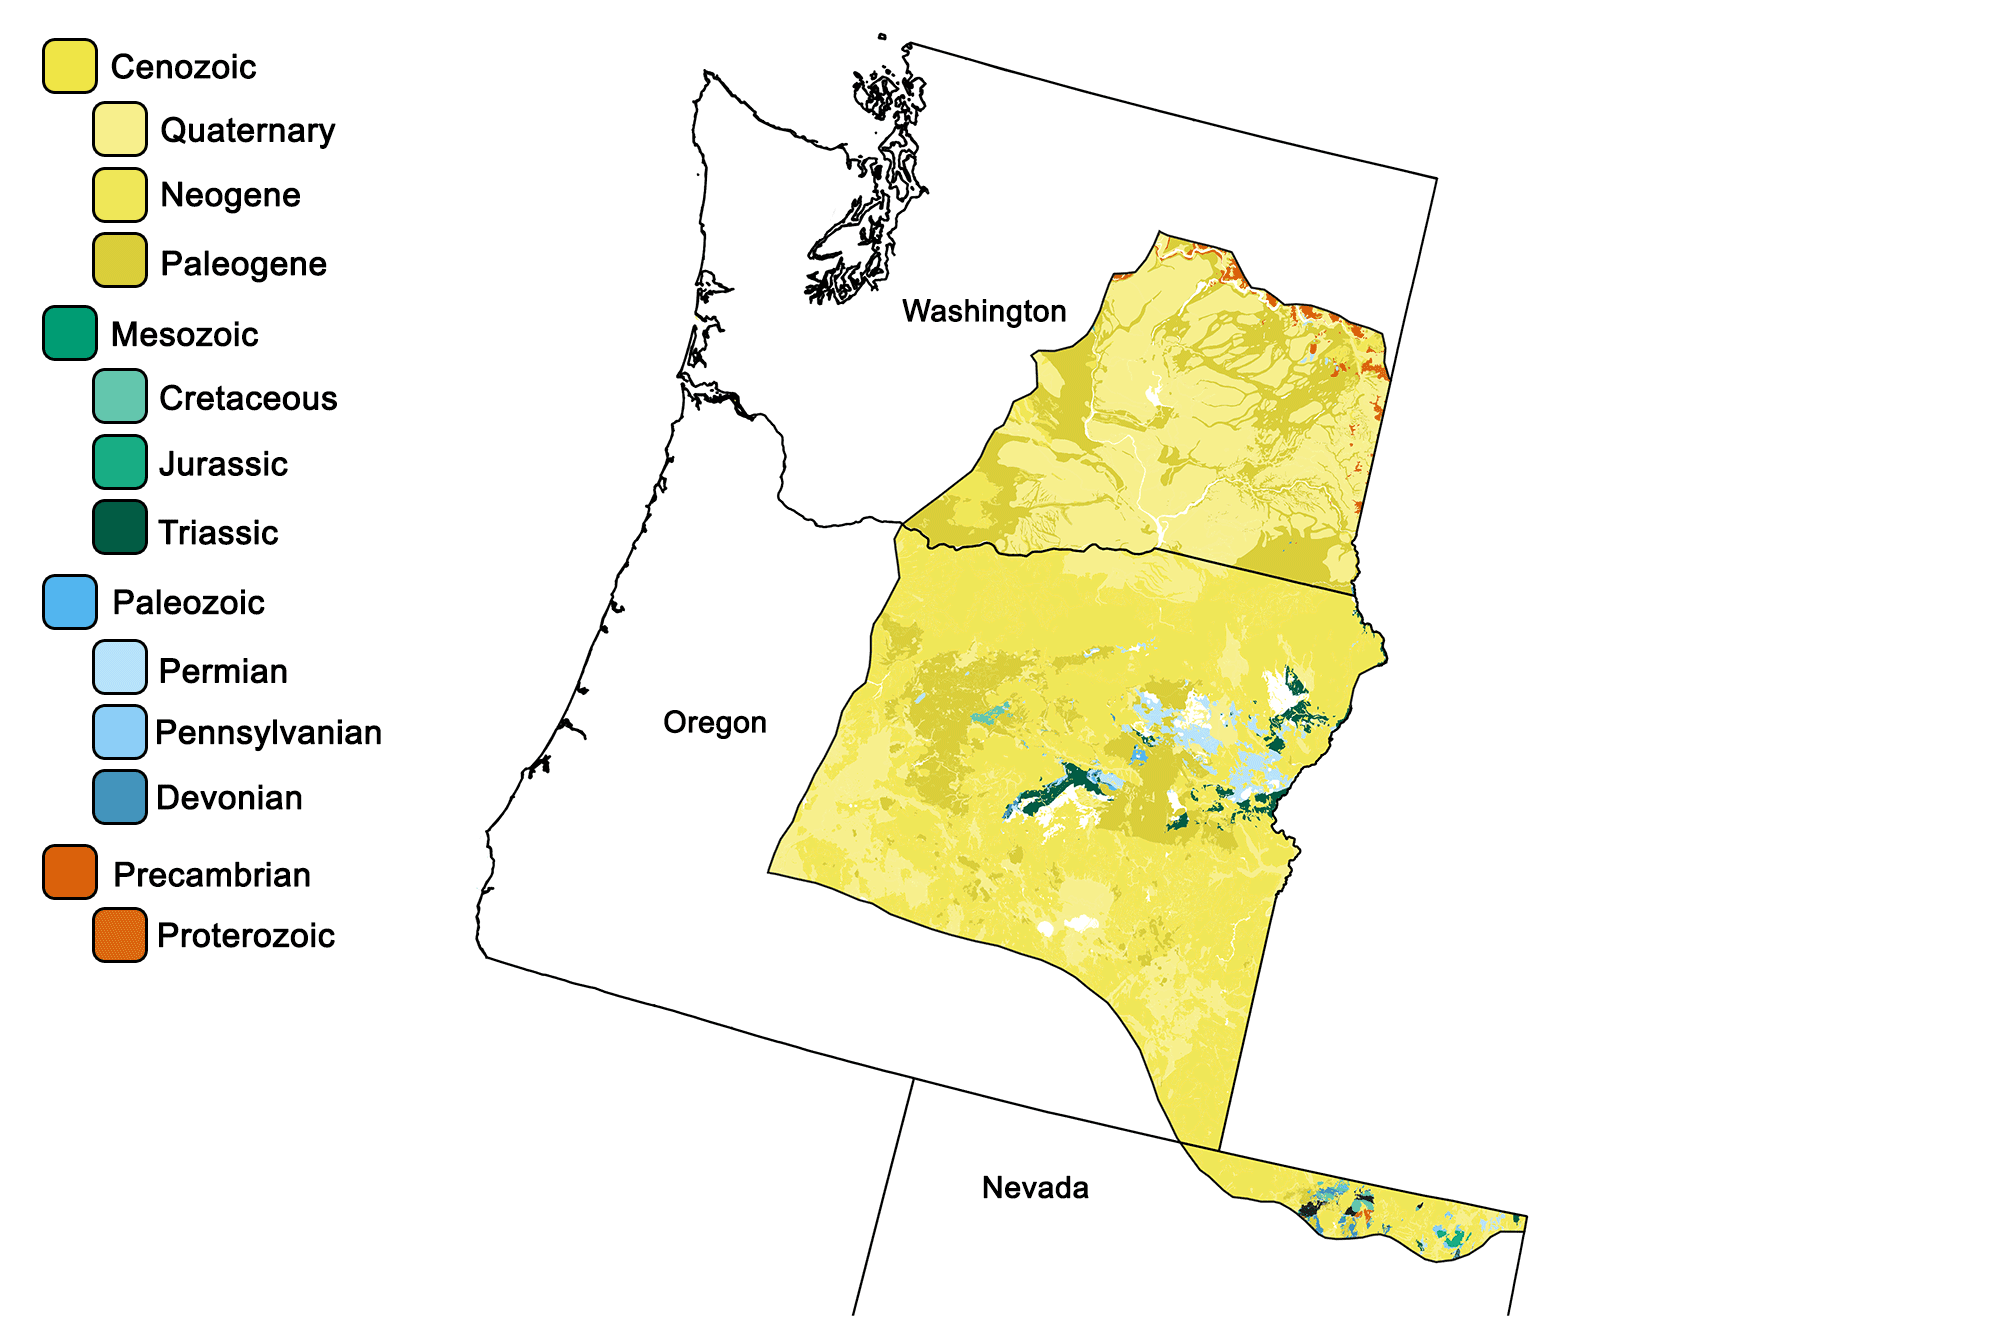 Geologic map of the Columbia Plateau region of the western United States.